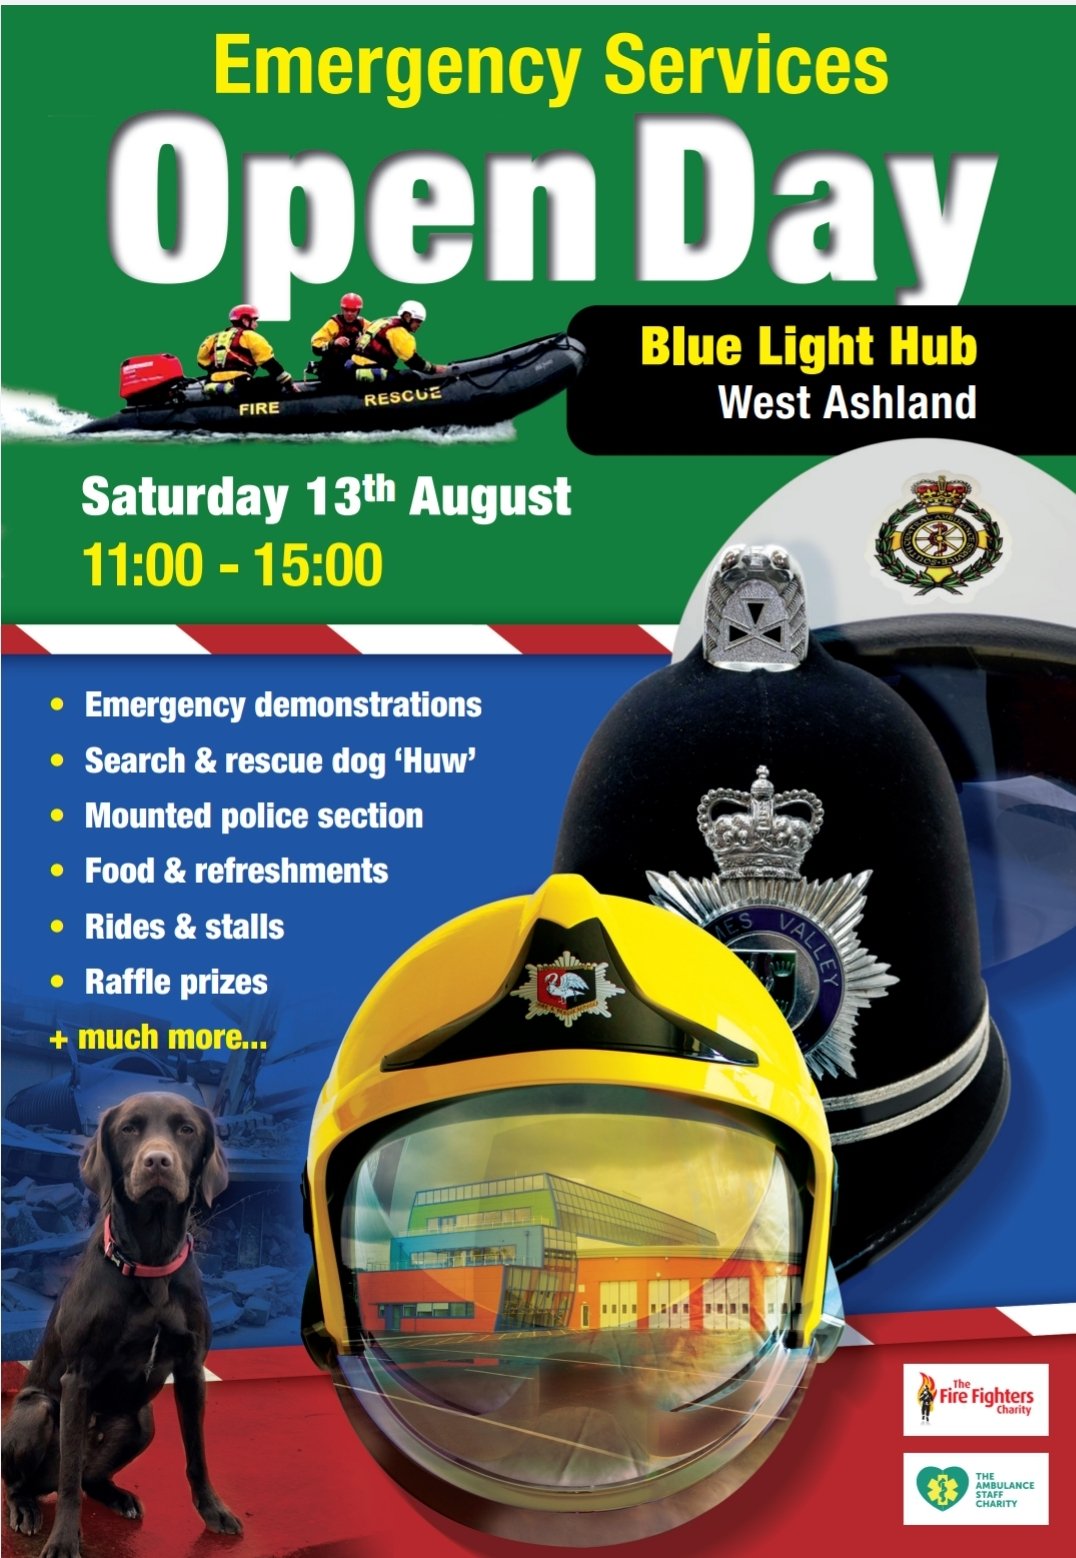 Emergency Services Open Day